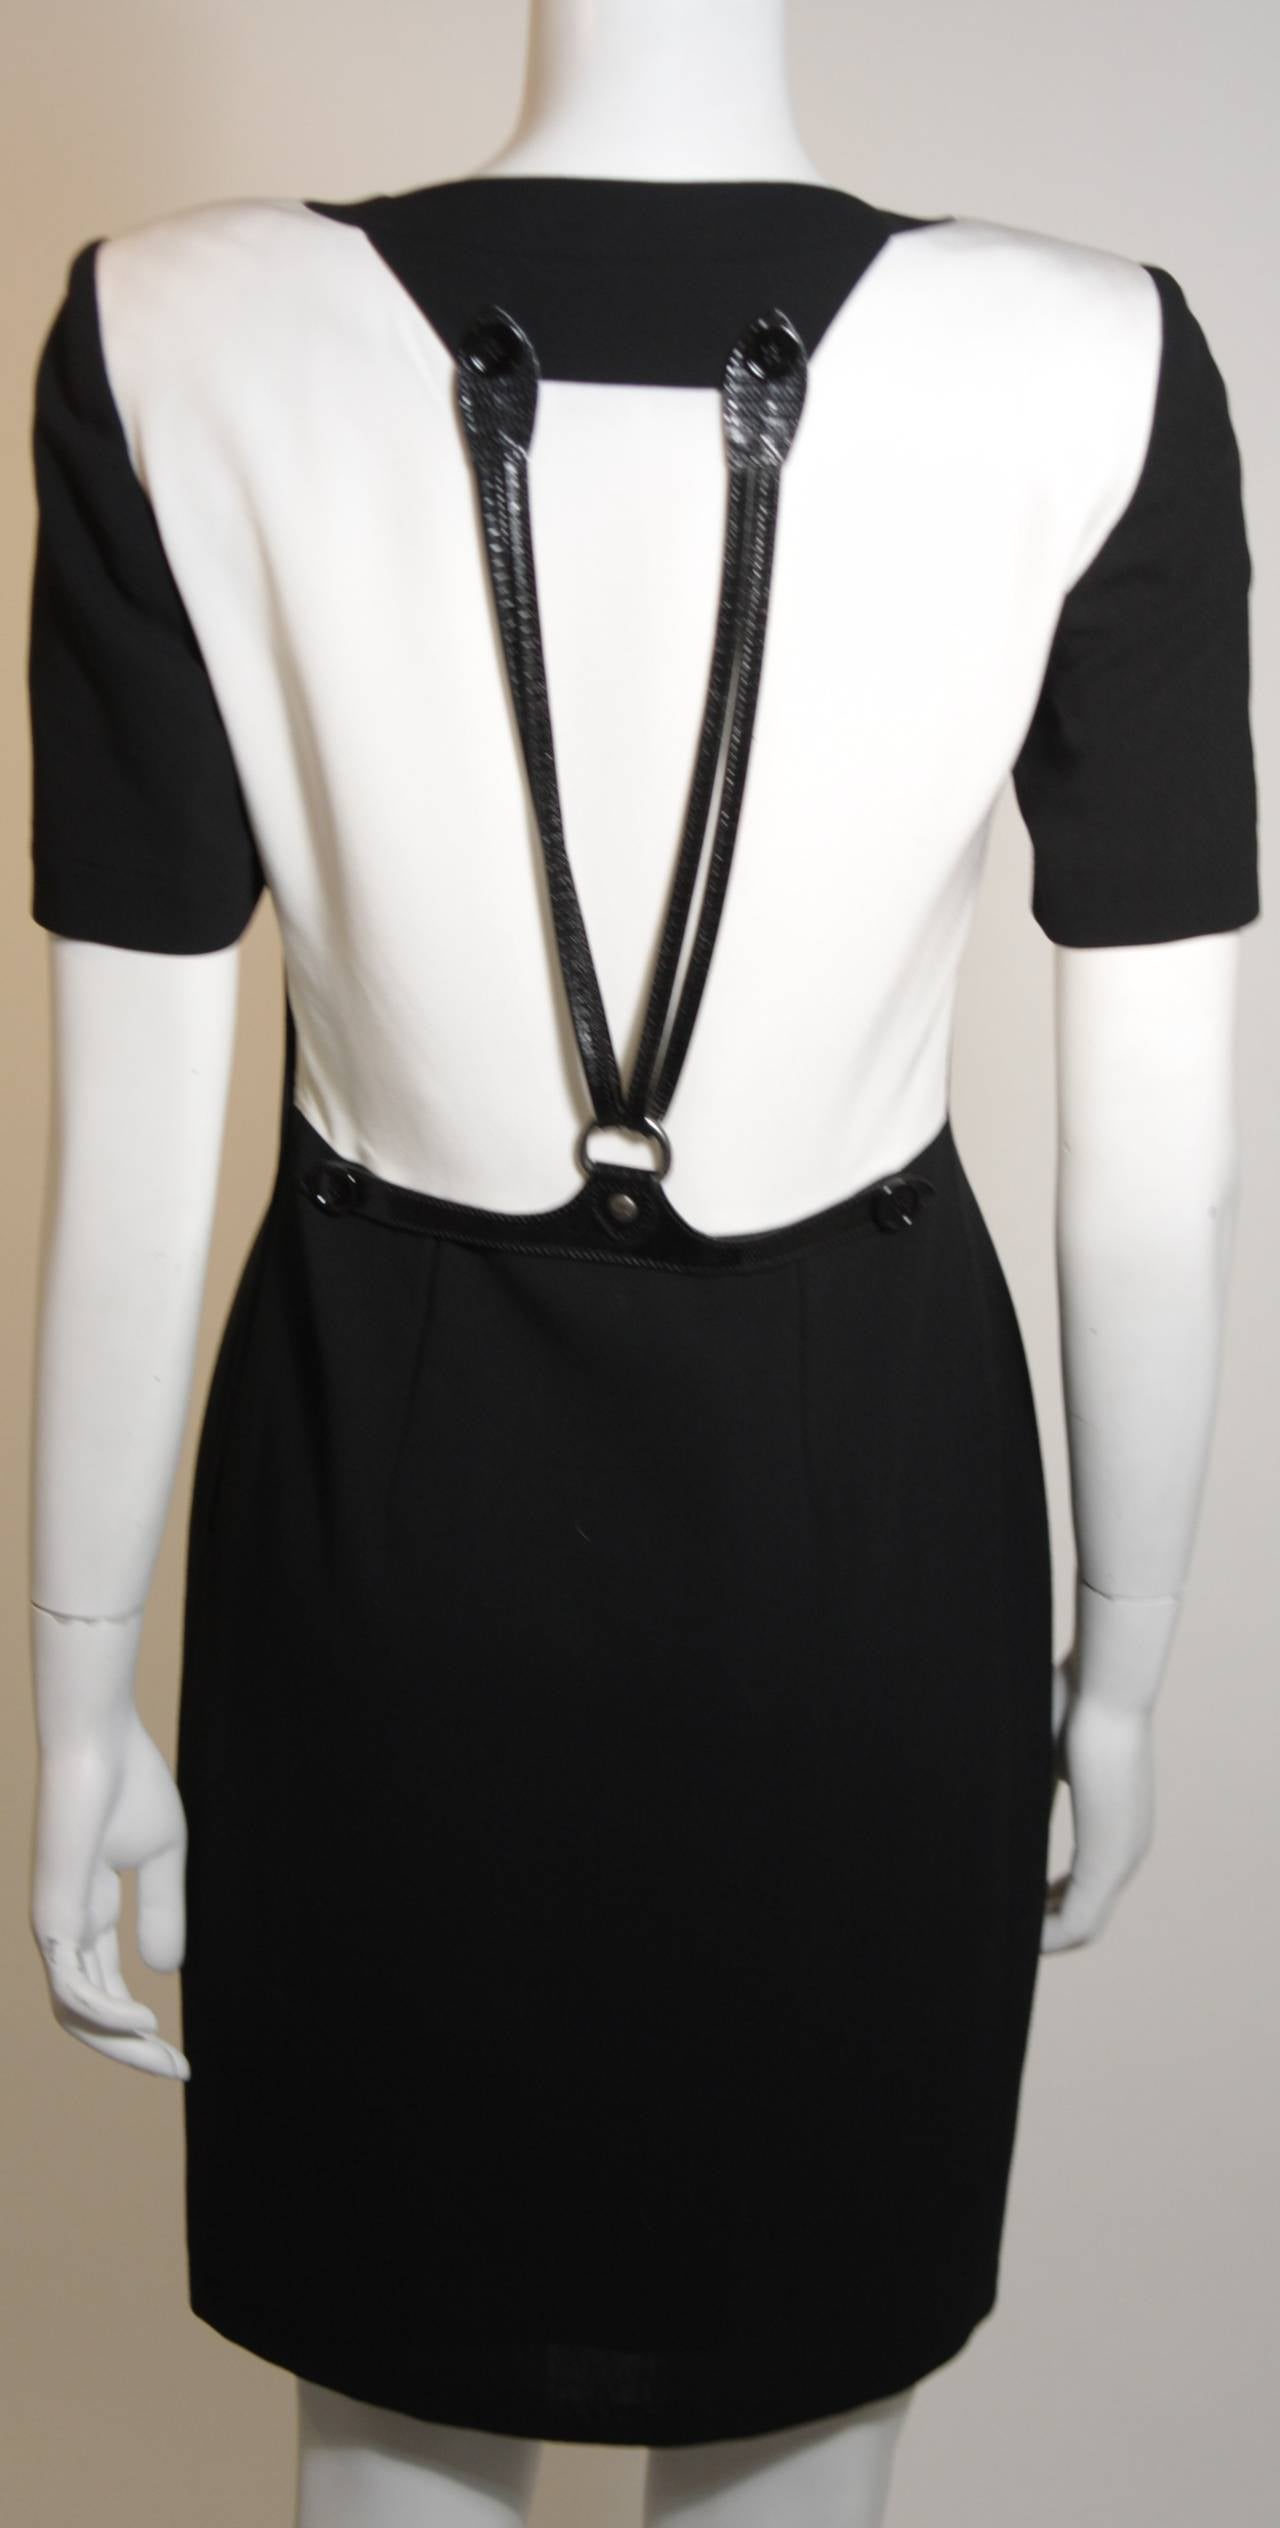 Gianfranco Ferre Black and White Contrast Dress with Suspender detail Size 40 For Sale 1